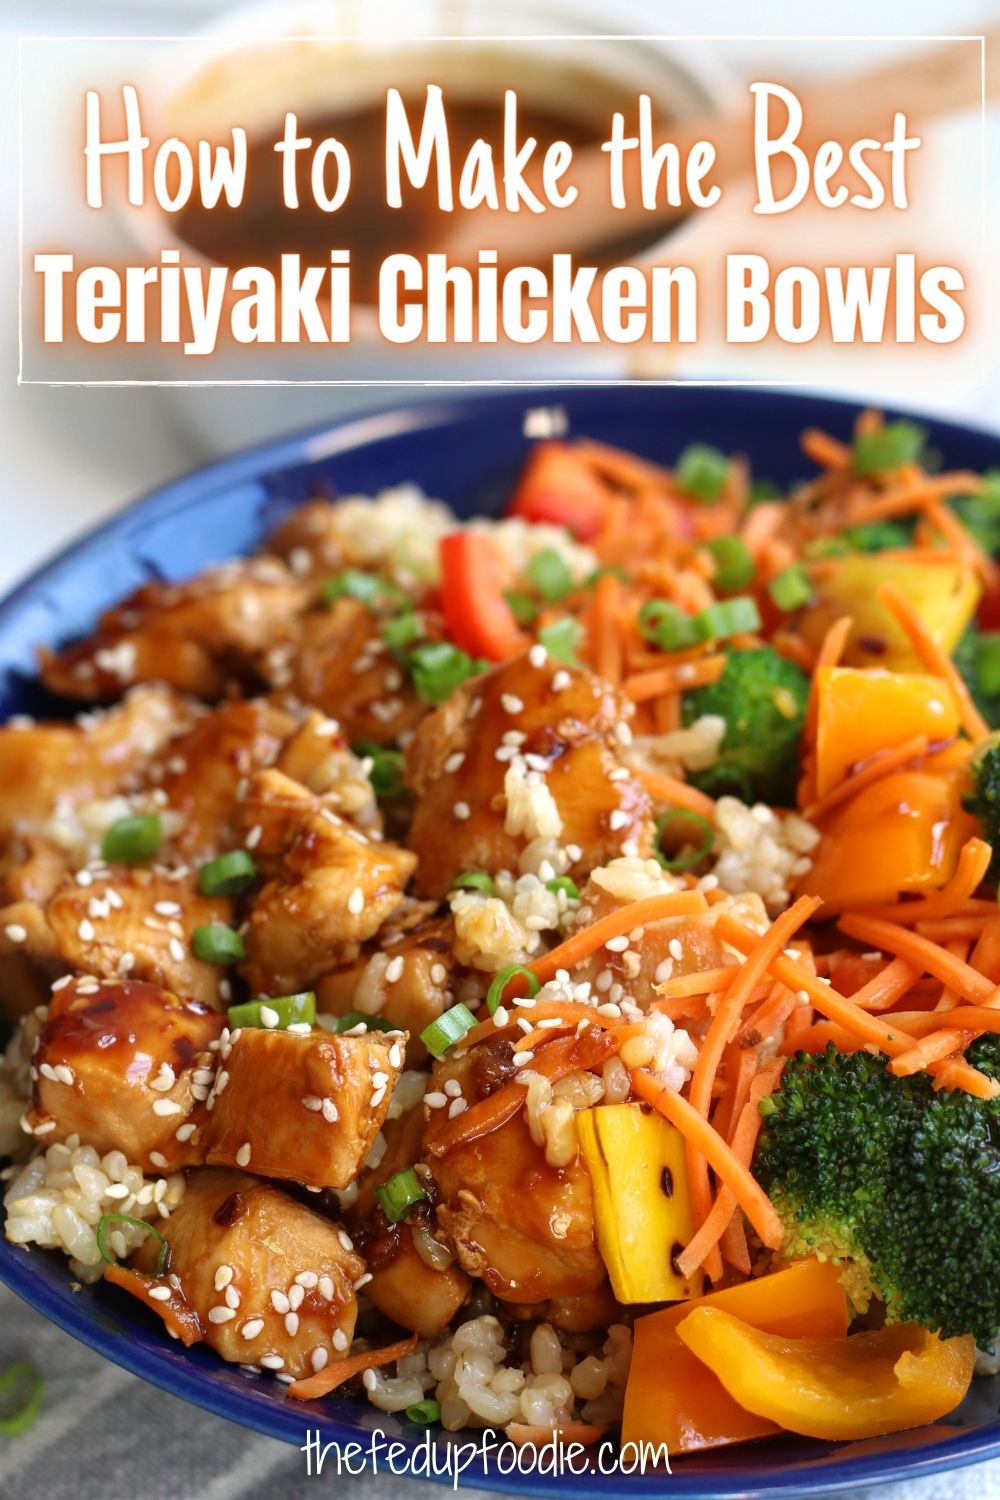 Teriyaki Chicken Bowls makes an incredibly easy and delicious meal the whole family will love. Made with Homemade Teriyaki Sauce, Short Grain Brown Rice, tender chicken and veggies. This meal is slightly sweet, savory, satisfying and makes a great homemade freezer meal.
#TeriyakiChicken #TeriyakiChickenStirFry #TeriyakiChickenBowl #AsianChickenBowl #TeriyakiChickenAndBroccoli #TerriakiChickenRecipeDinners